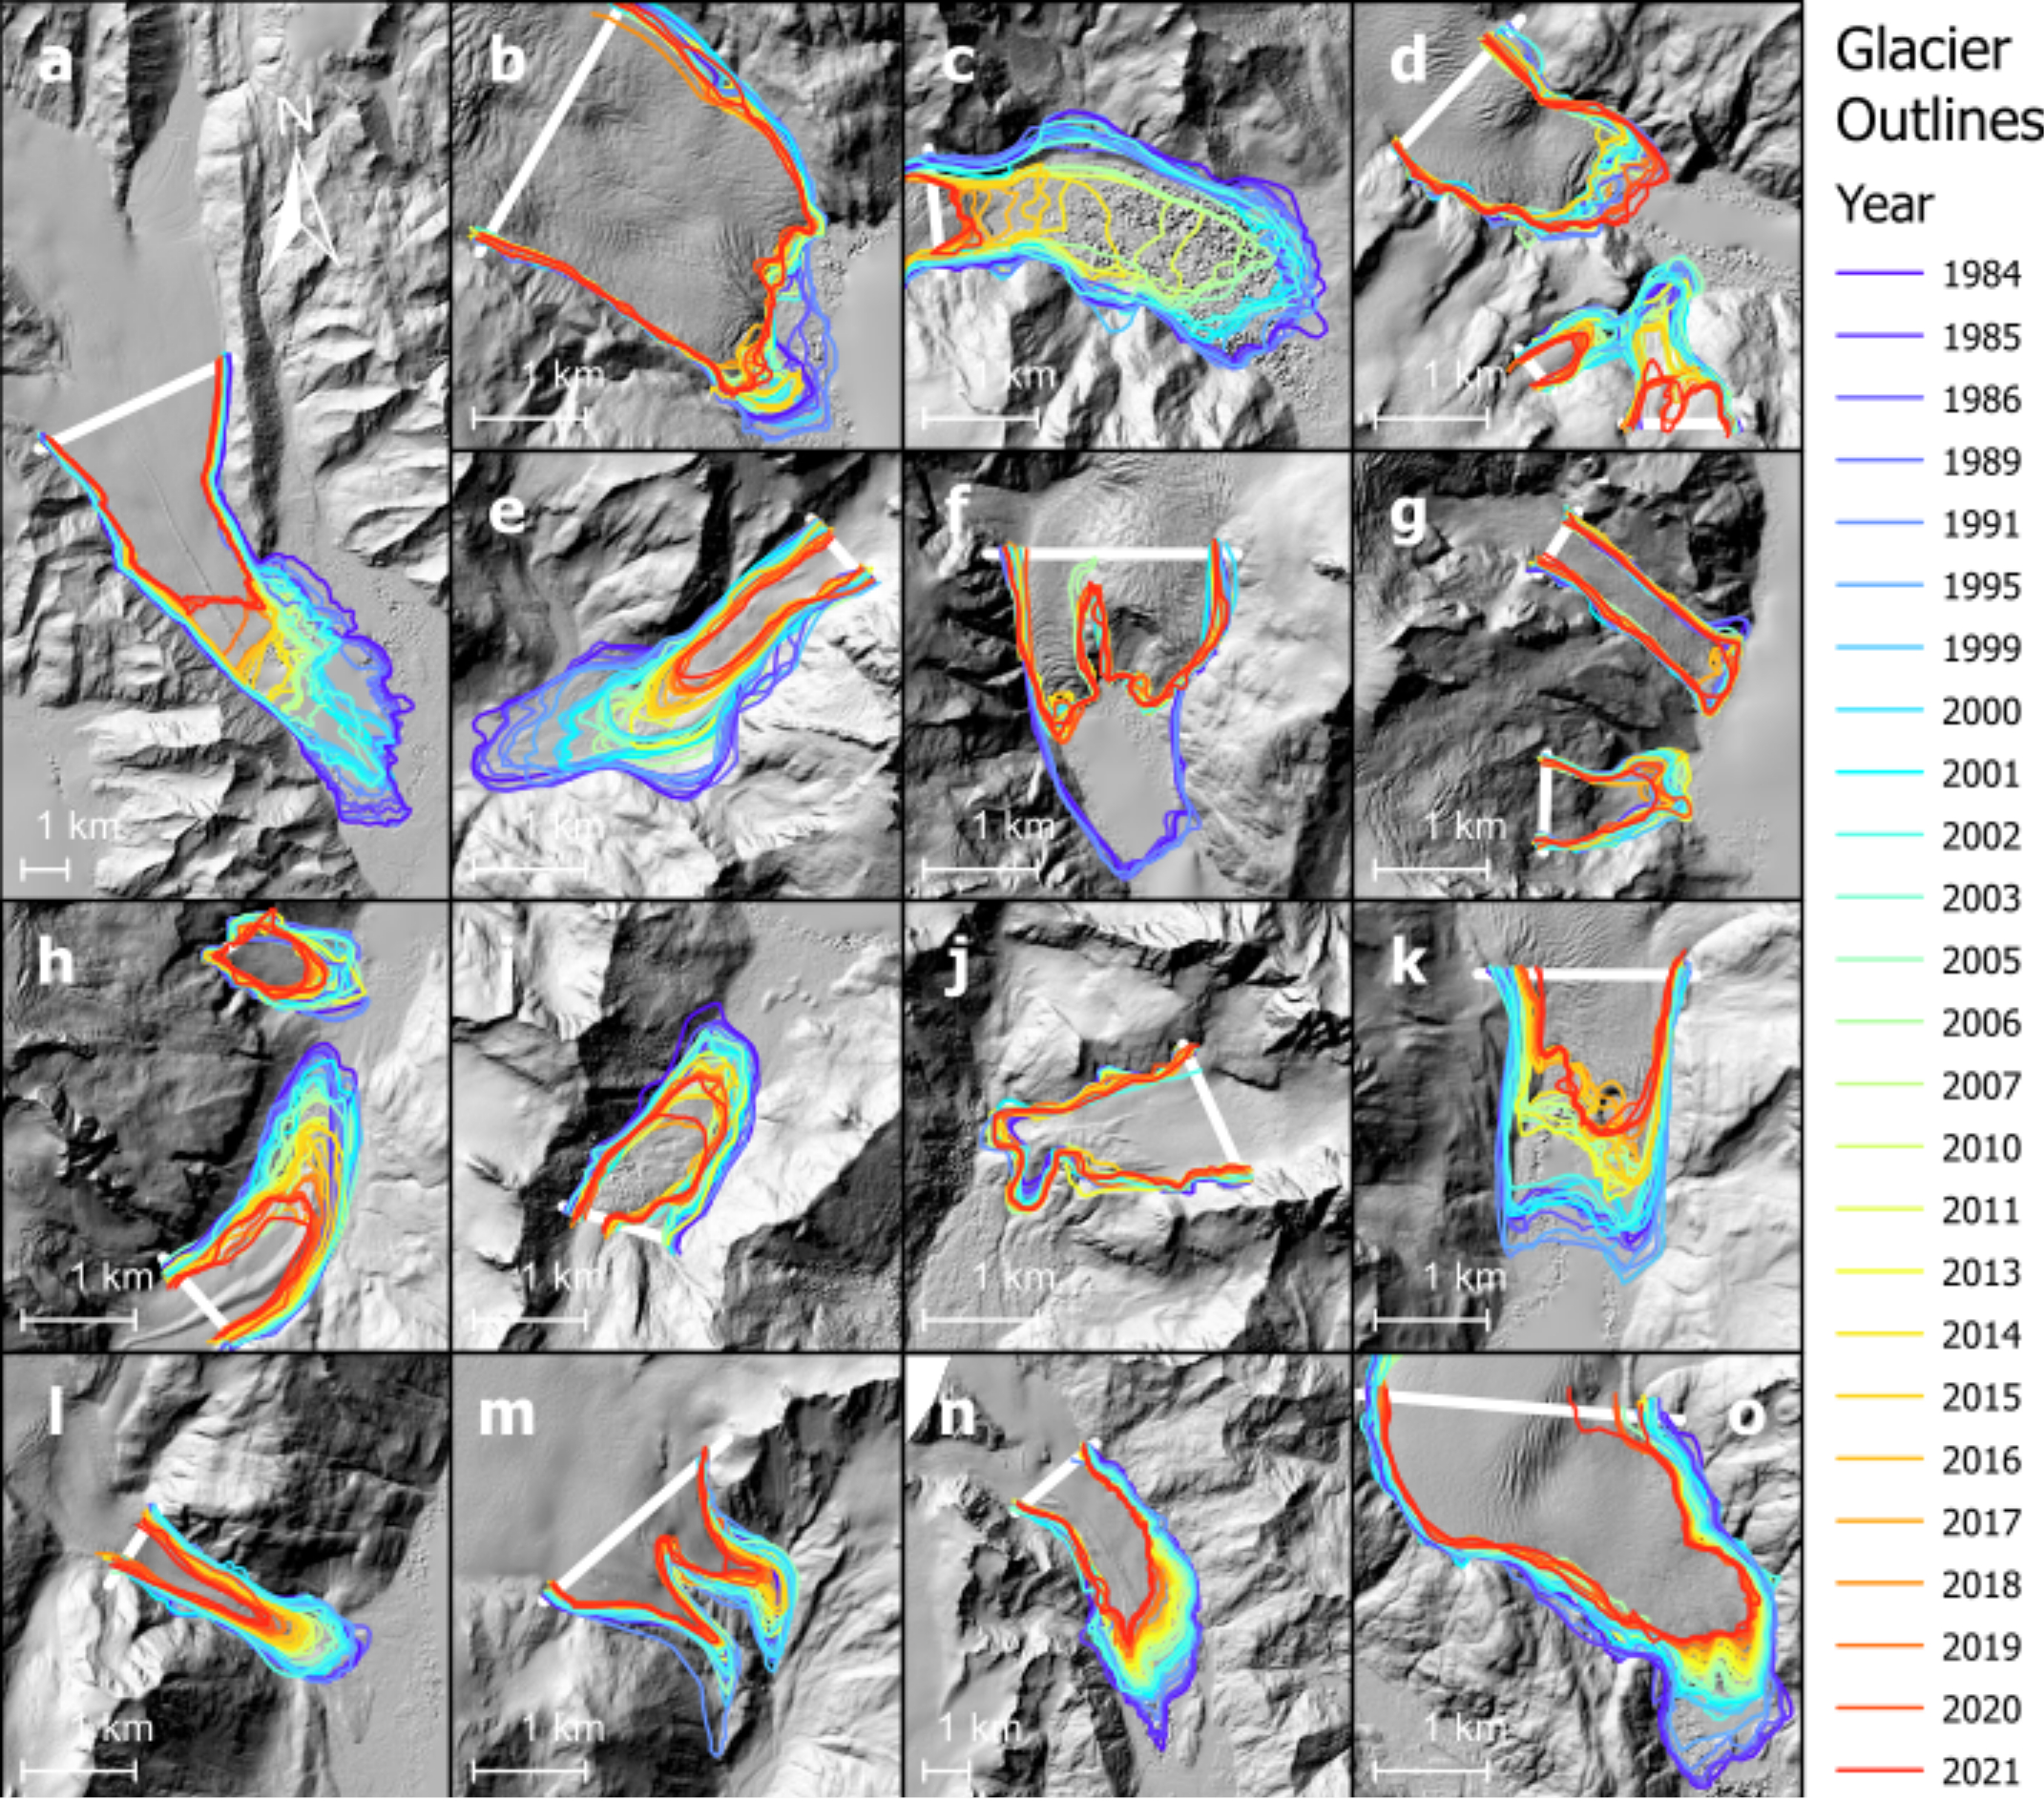 A figure illustrating the change in glacier coverage between 1984 and 2021 